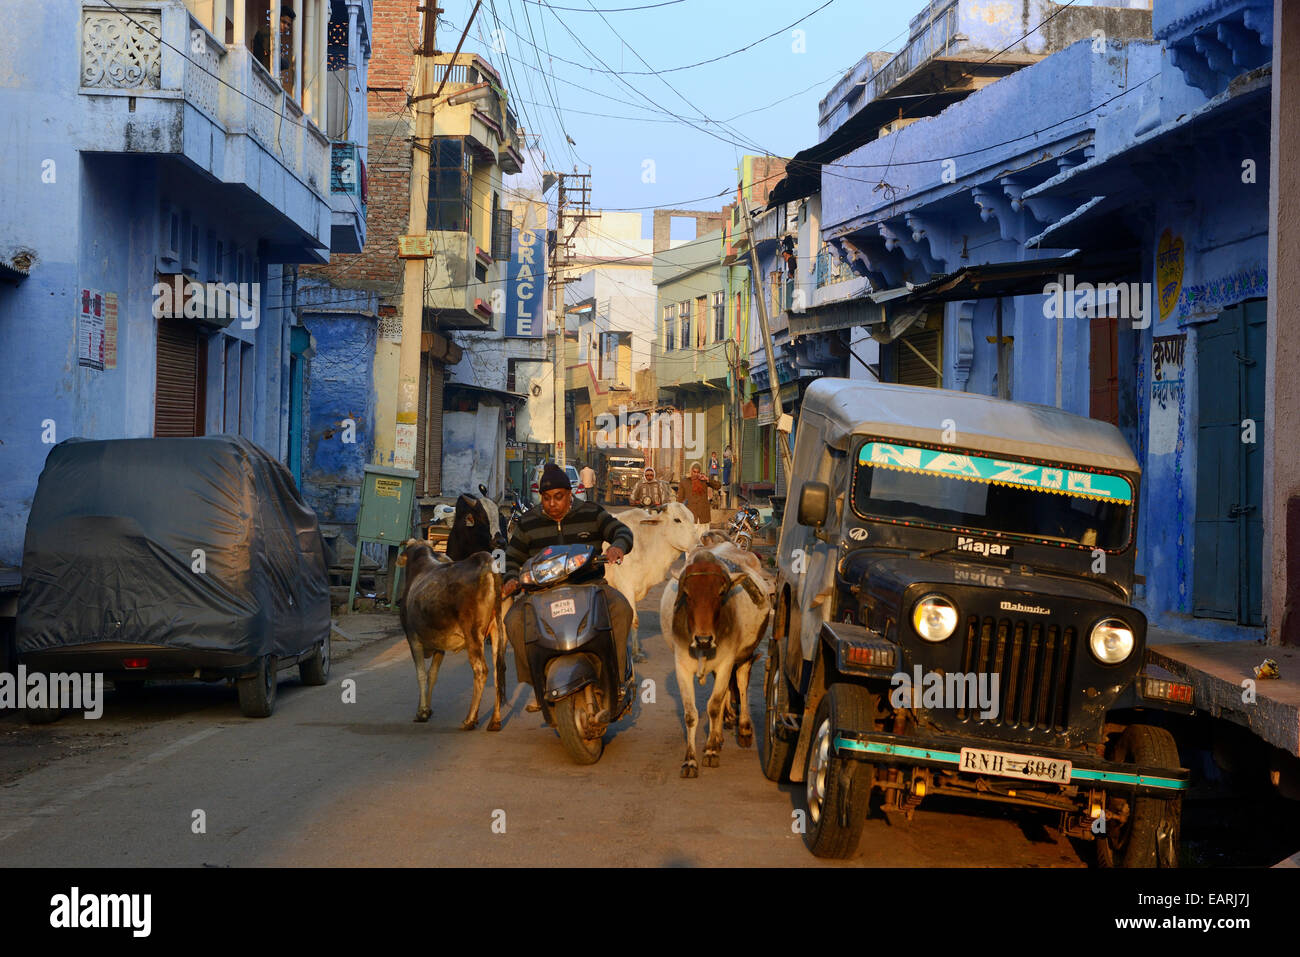 India, Rajasthan region of Mewar, Bundi village atmosphere of a street with its sacred cows Stock Photo